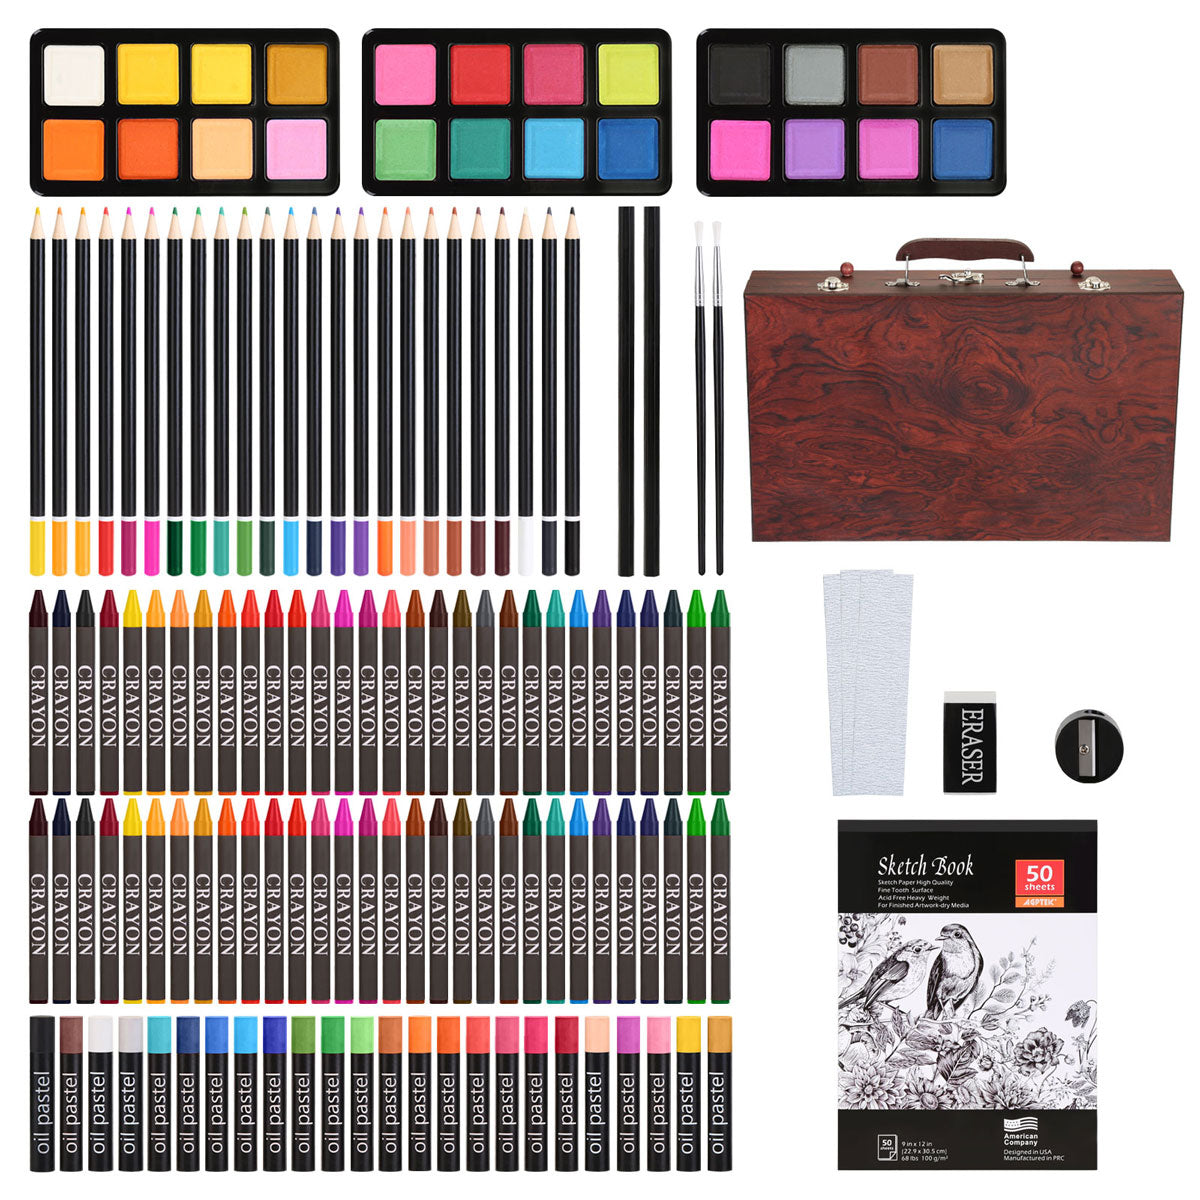 Artistik Deluxe Art Set - 141 Piece Professional Painting, Sketching & Drawing Art Set, with Wood Art Storage Box and Bonus A5 Sketchpad